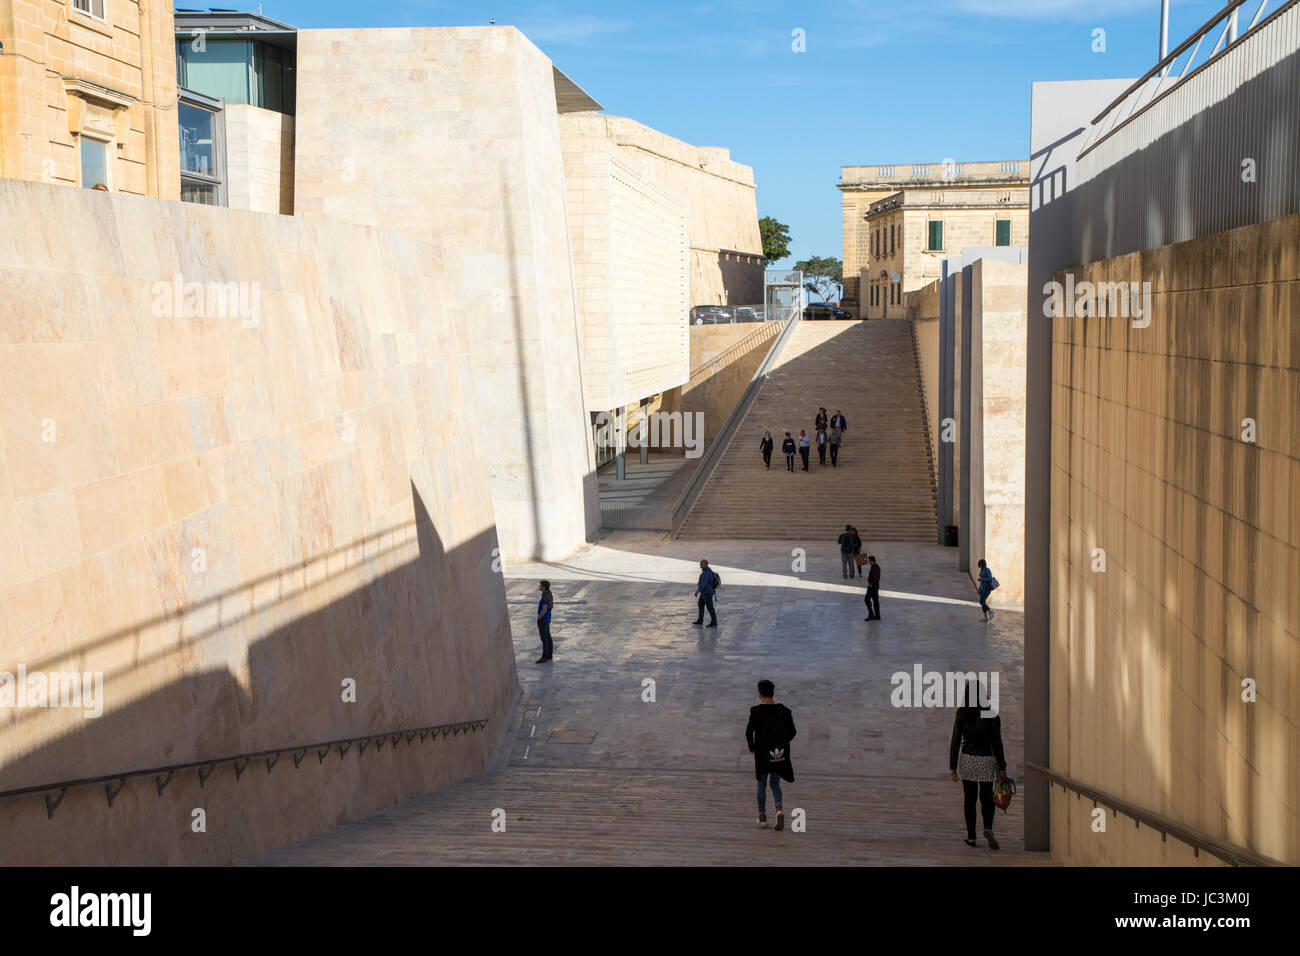 Malta, Valletta, capital, at the new Parliament, City Gate, stairs, Stock Photo